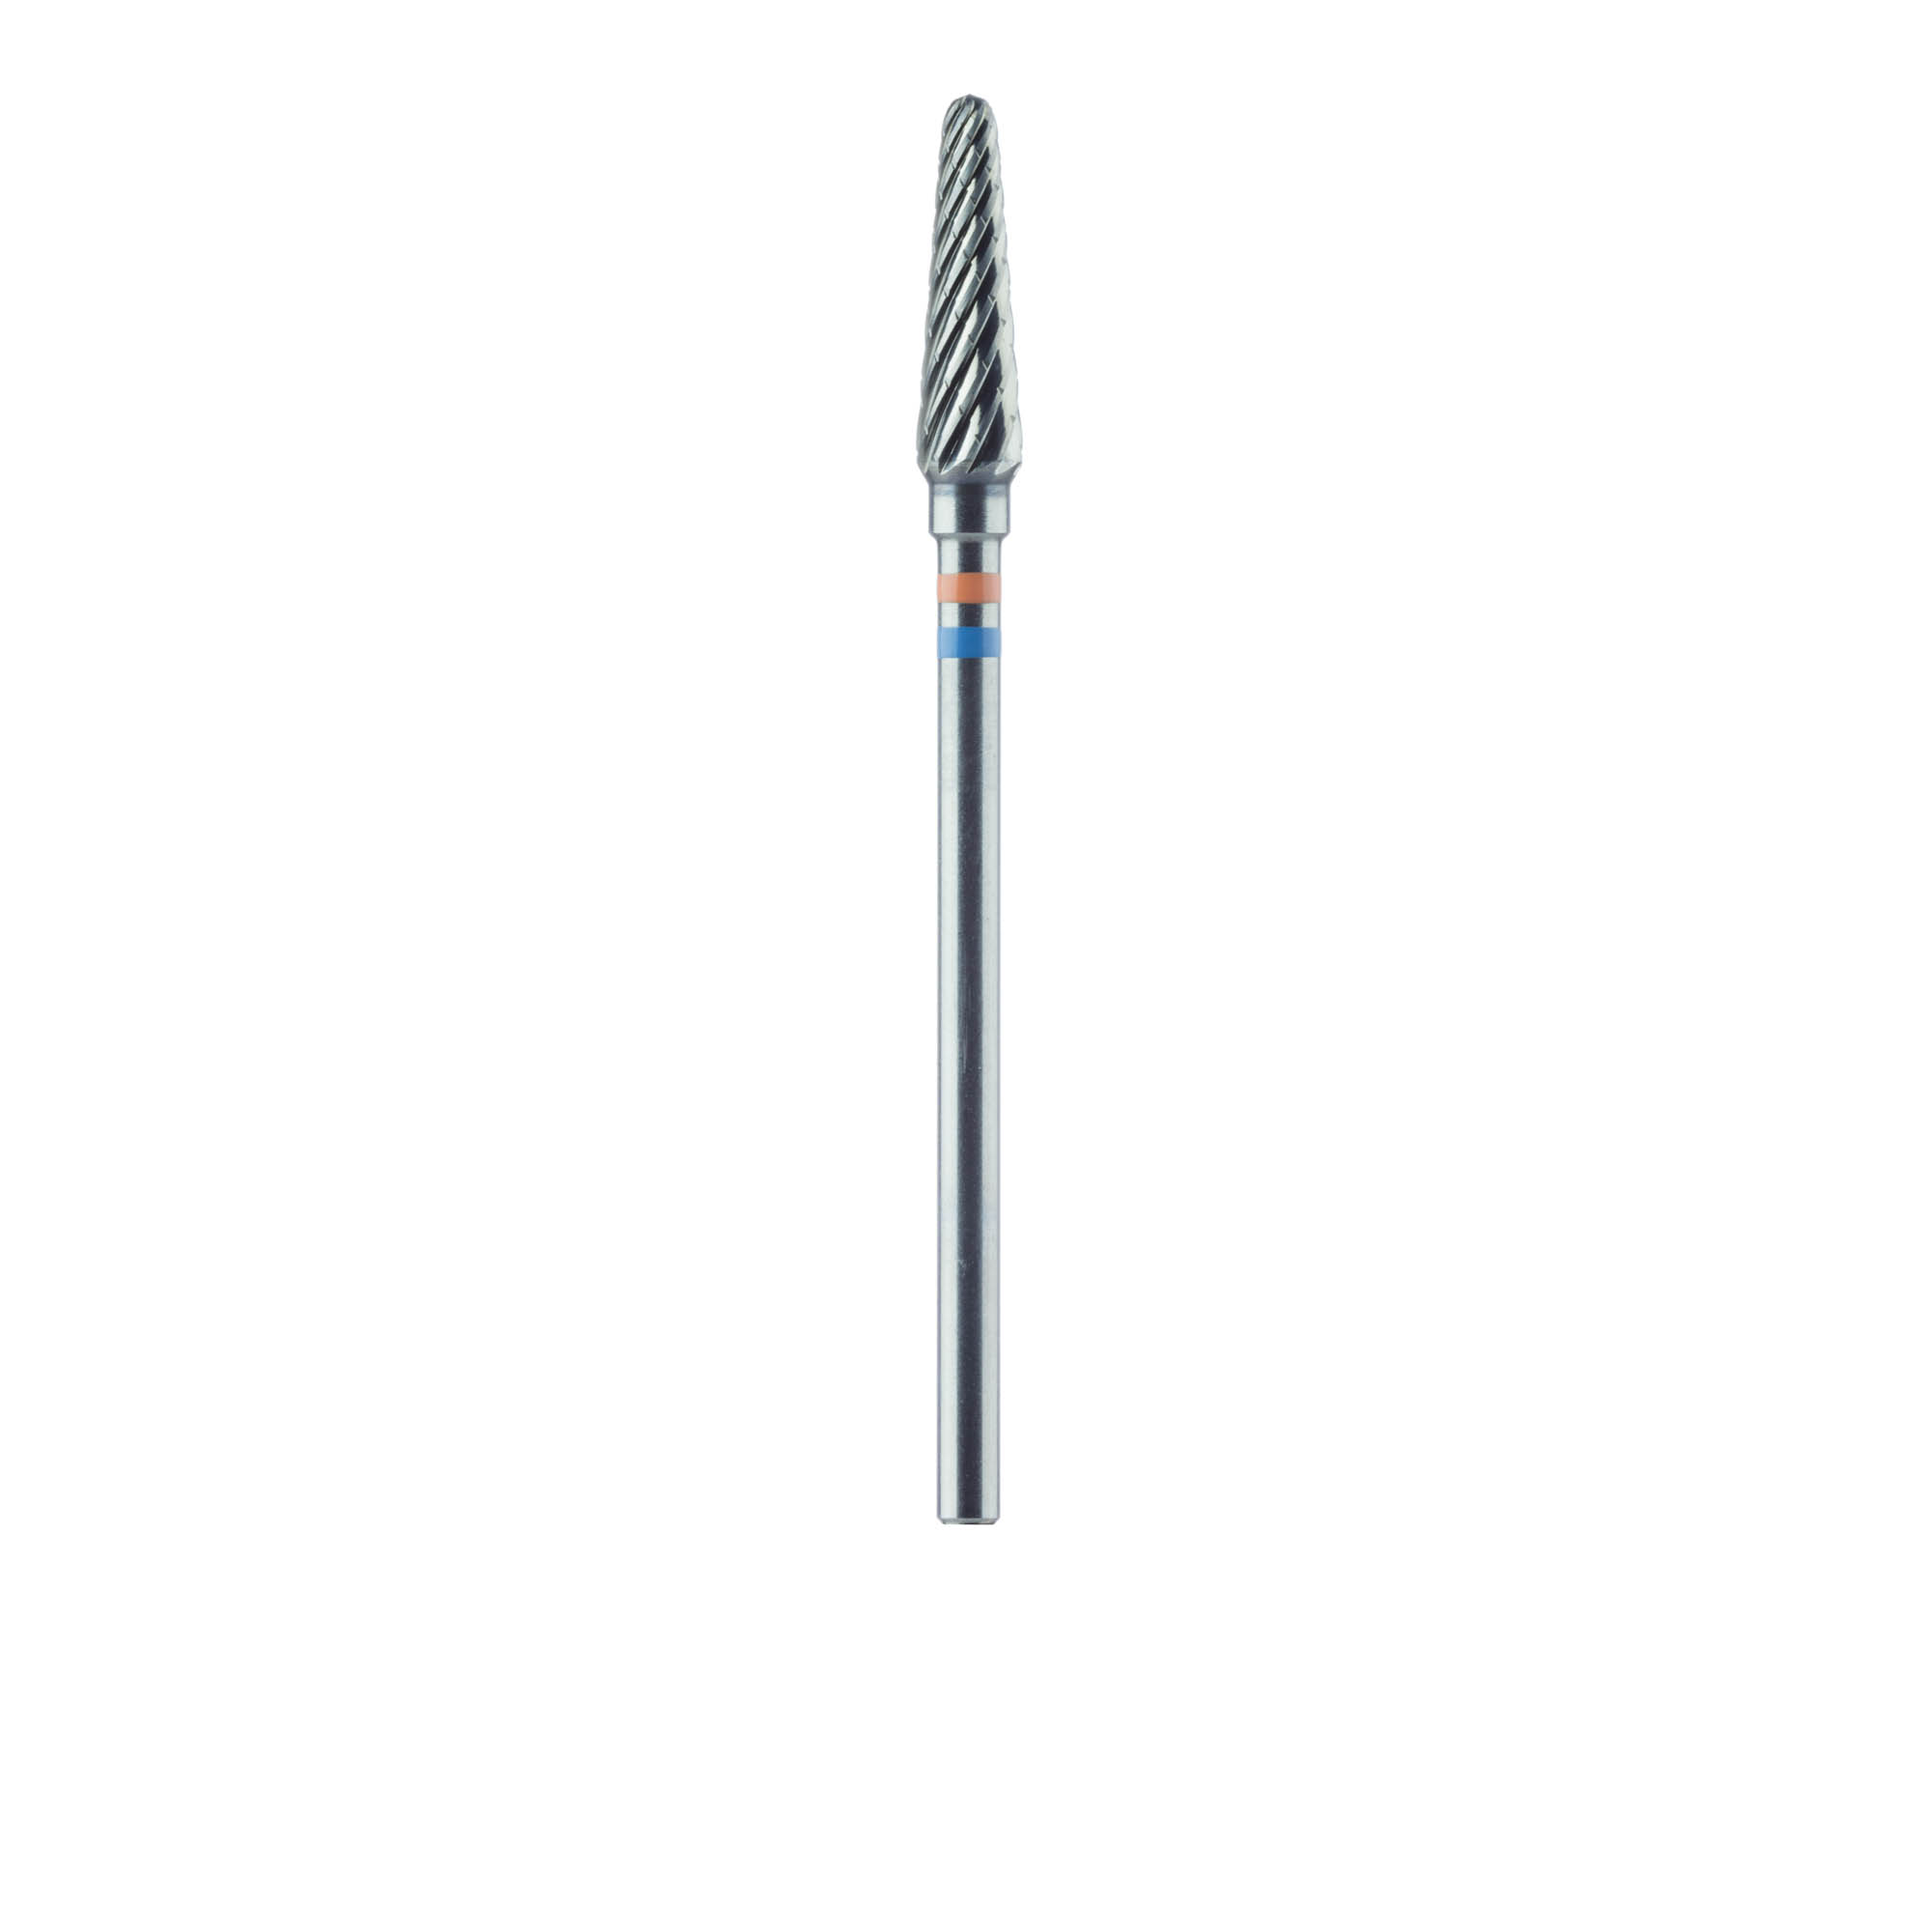 HM79FF-040-HP Carbide Cutter, Fine, Faceted Toothing with Cross Cut, Round End Taper, 4mm Ø, HP